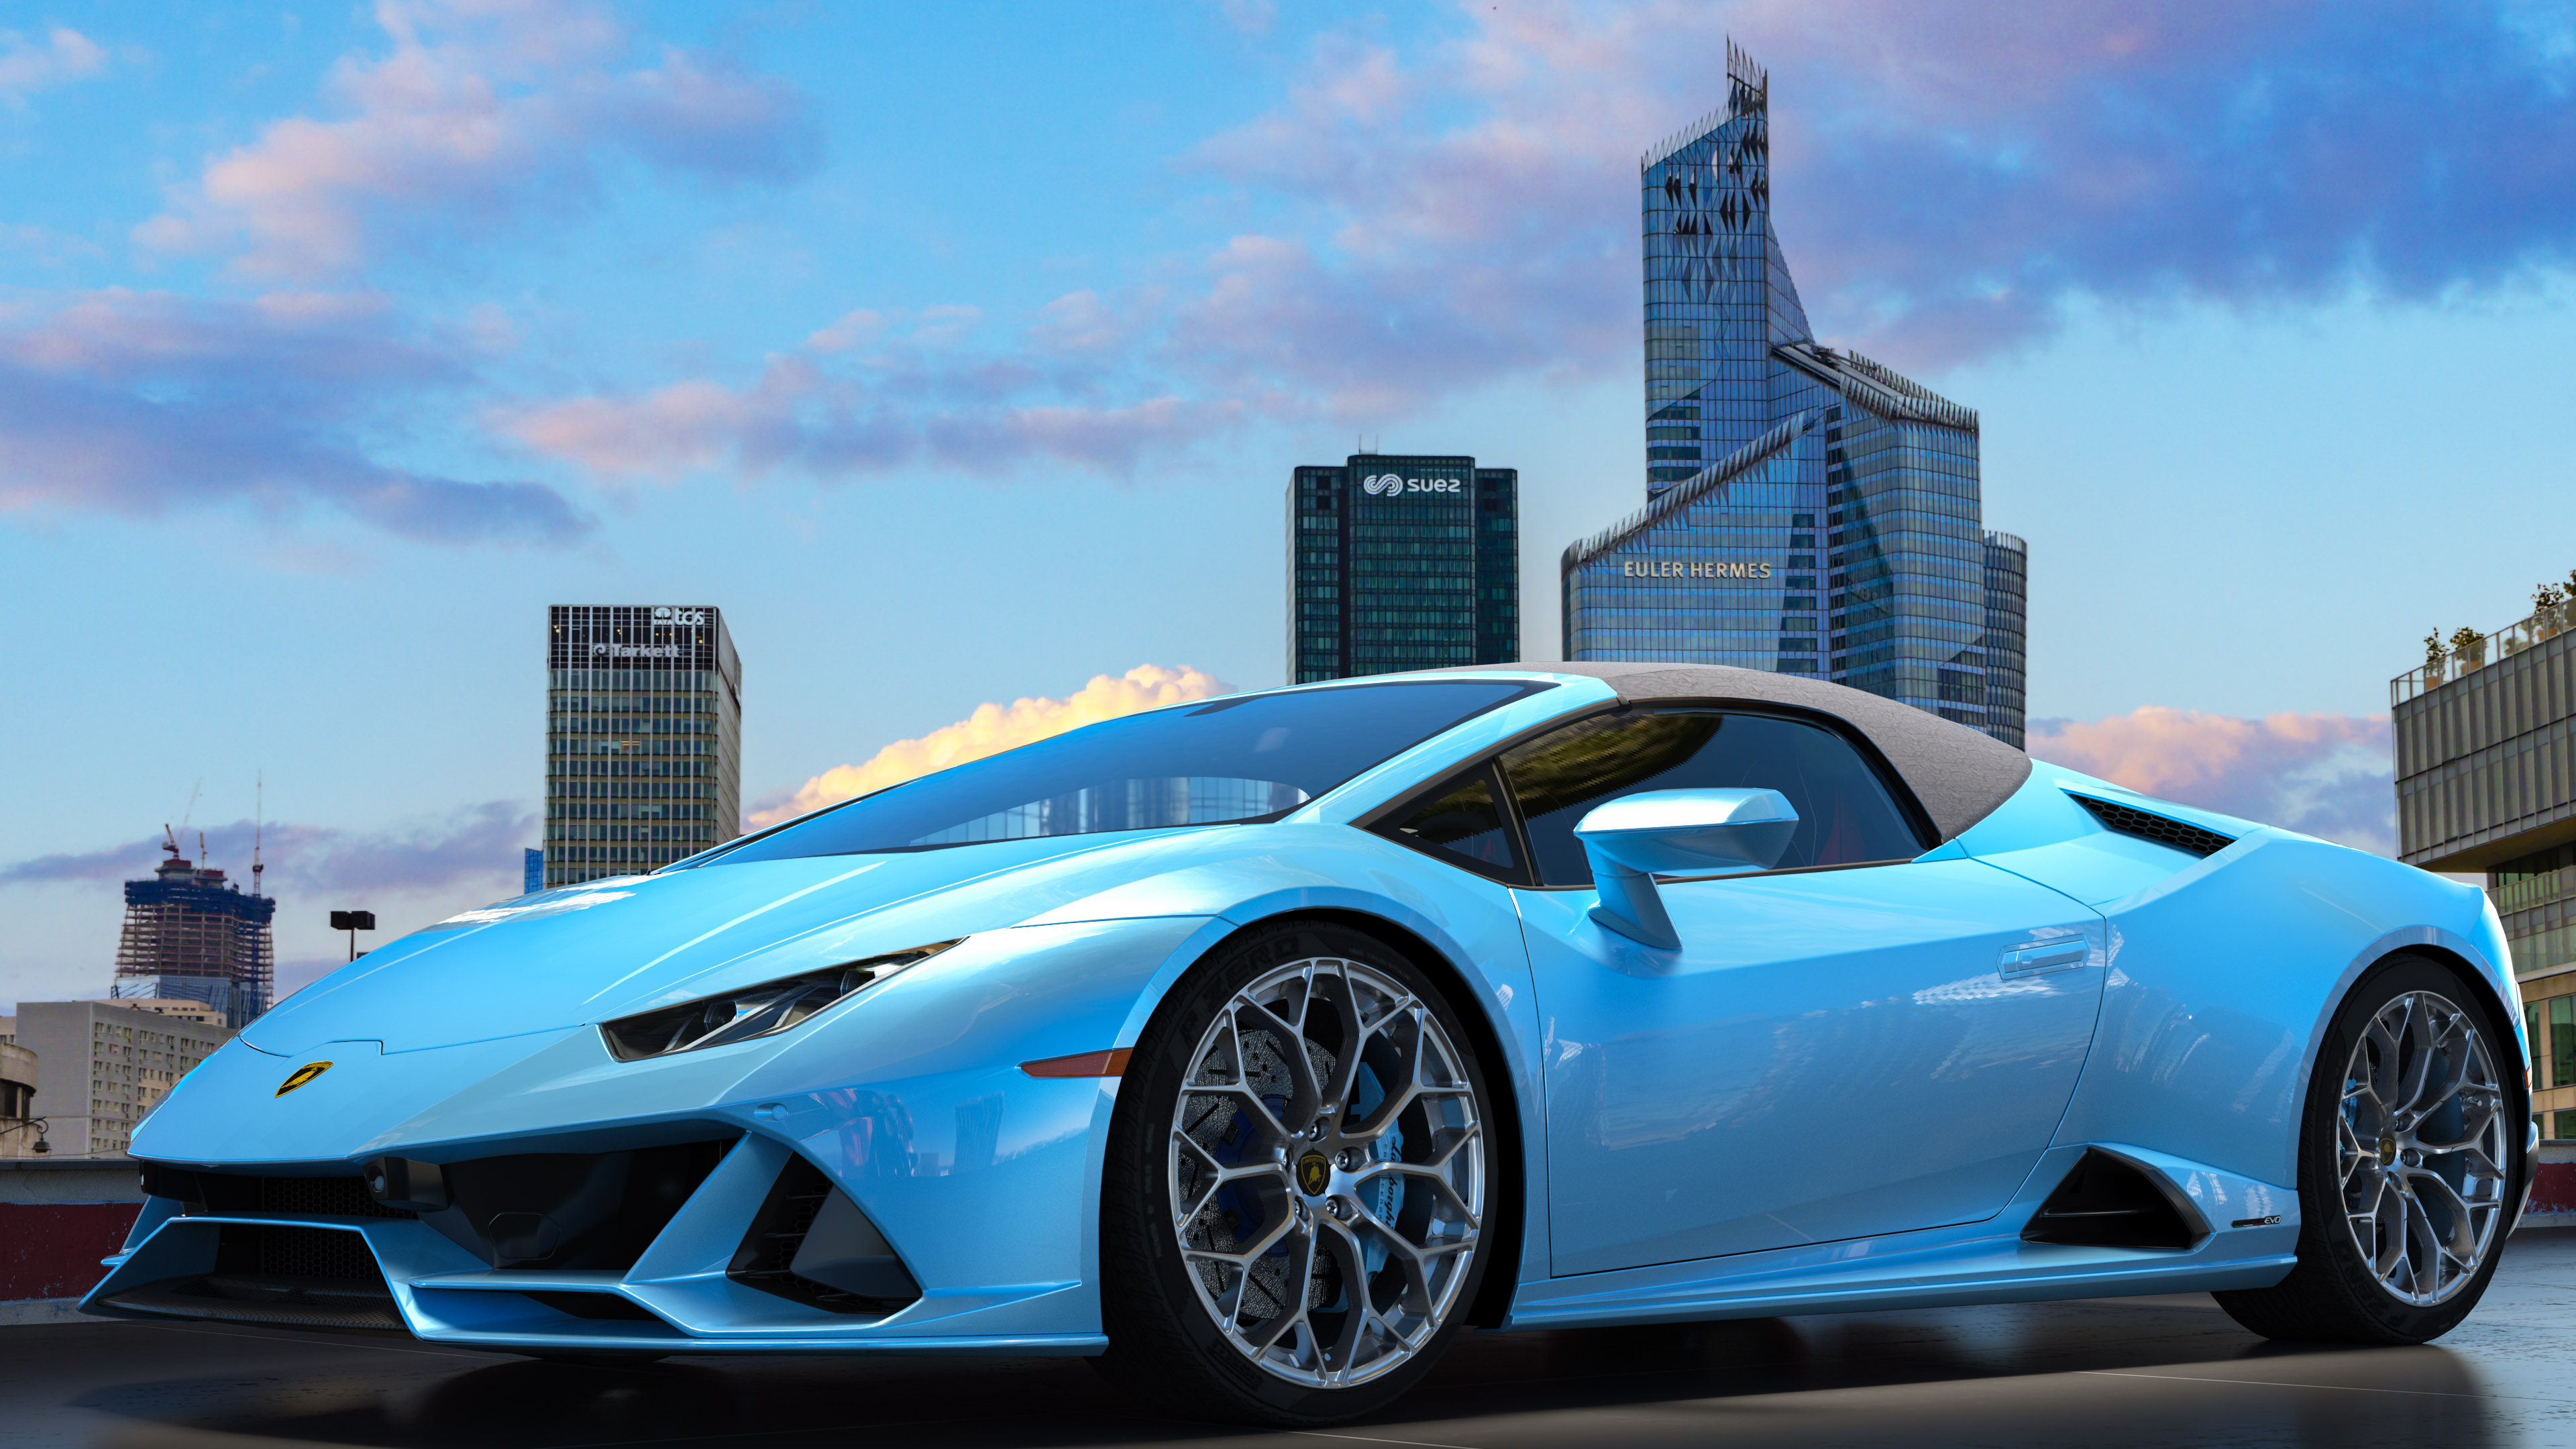 Rev up your device’s aesthetics with our 4K wallpaper featuring the sleek and stylish Lamborghini Huracan.